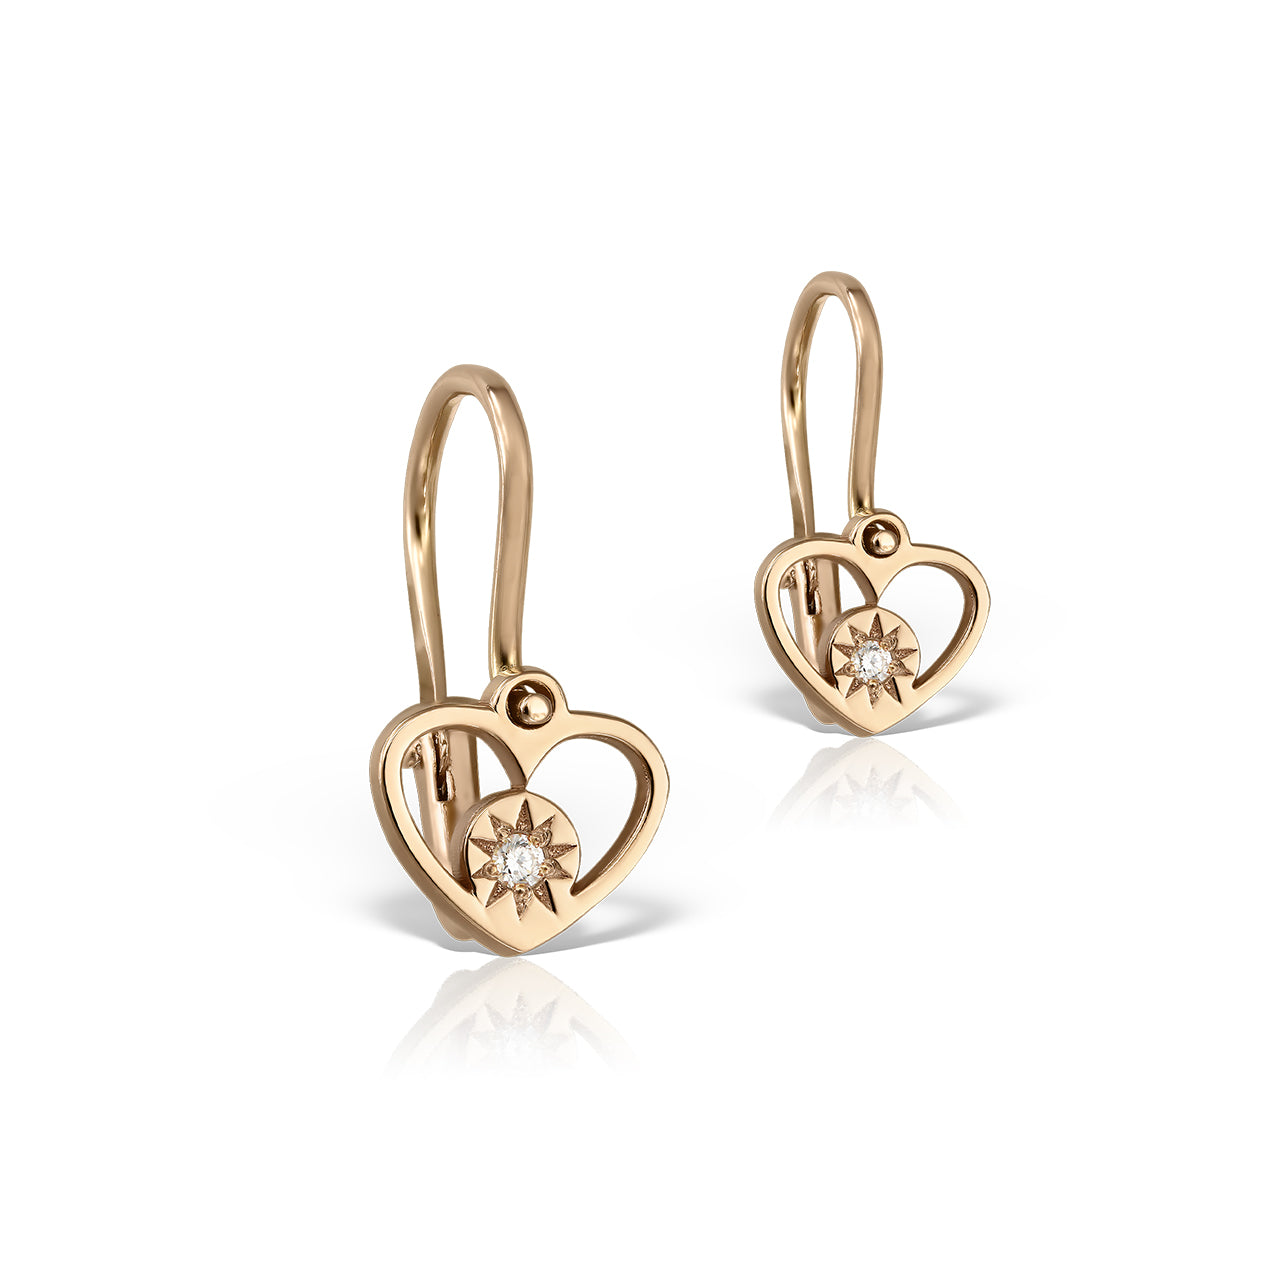 Baby Earrings Circle in a Heart with white diamonds, in rose gold - zeaetsia